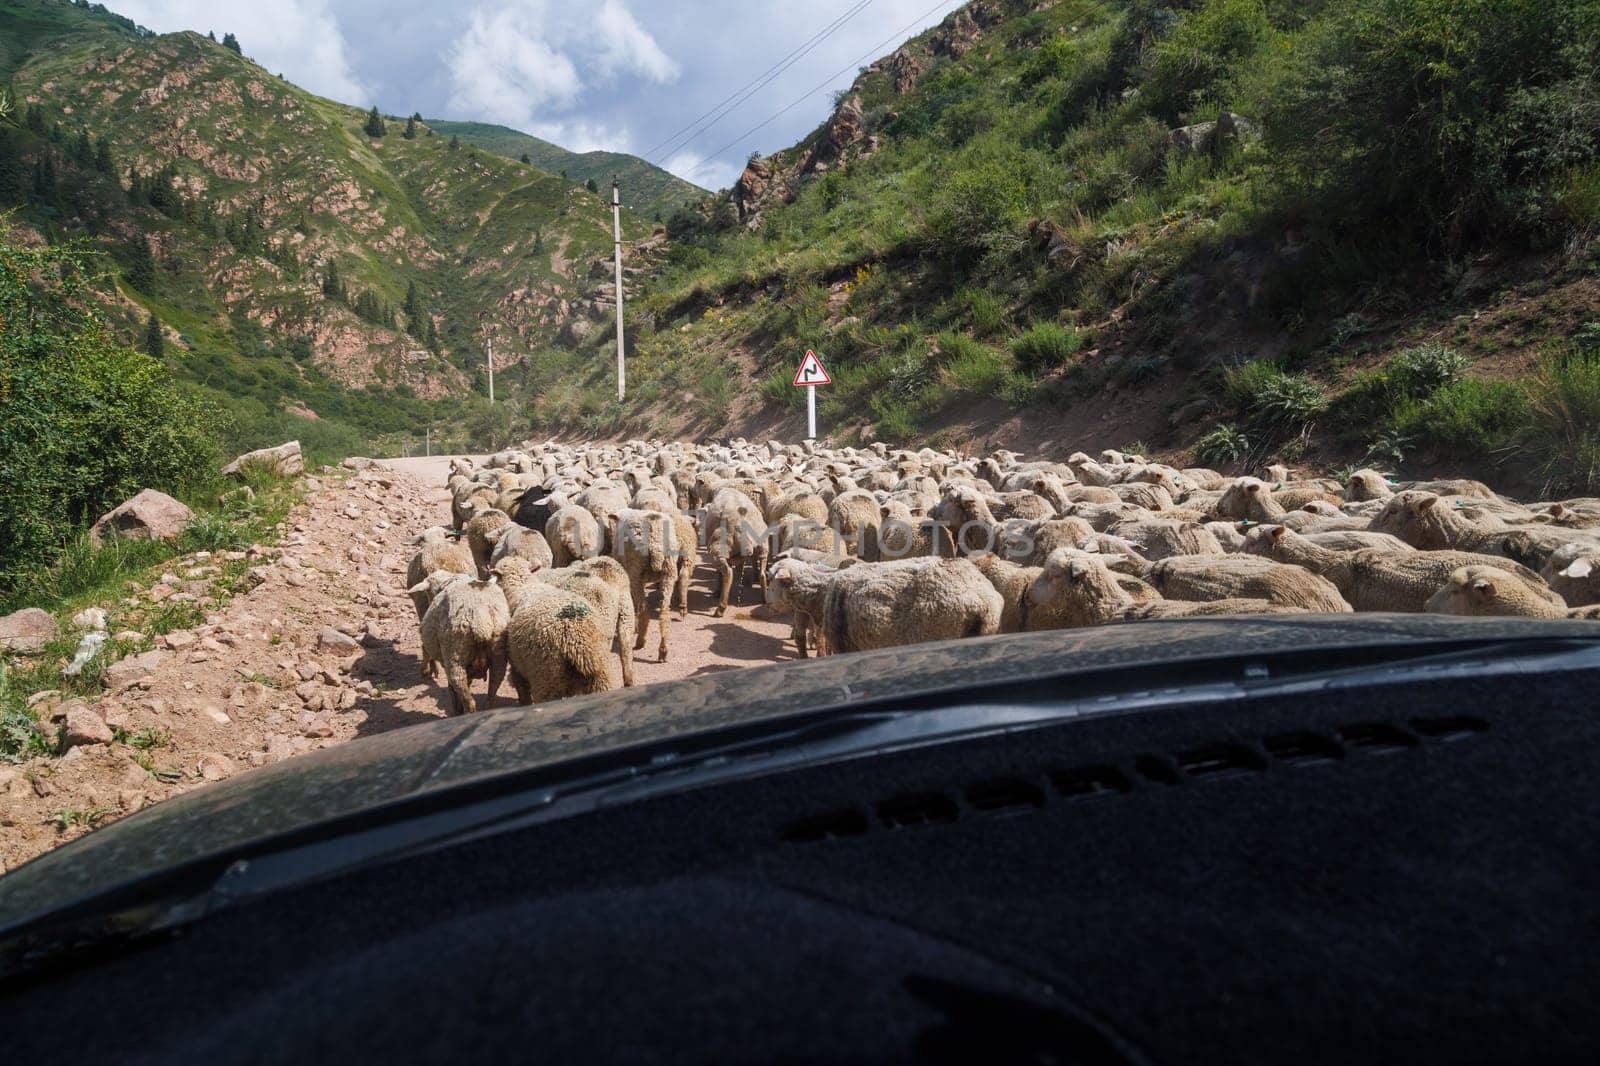 A flock of sheep blocking the dusty dirt road winding through valley with mountains at sunny day. View from inside a car. by z1b